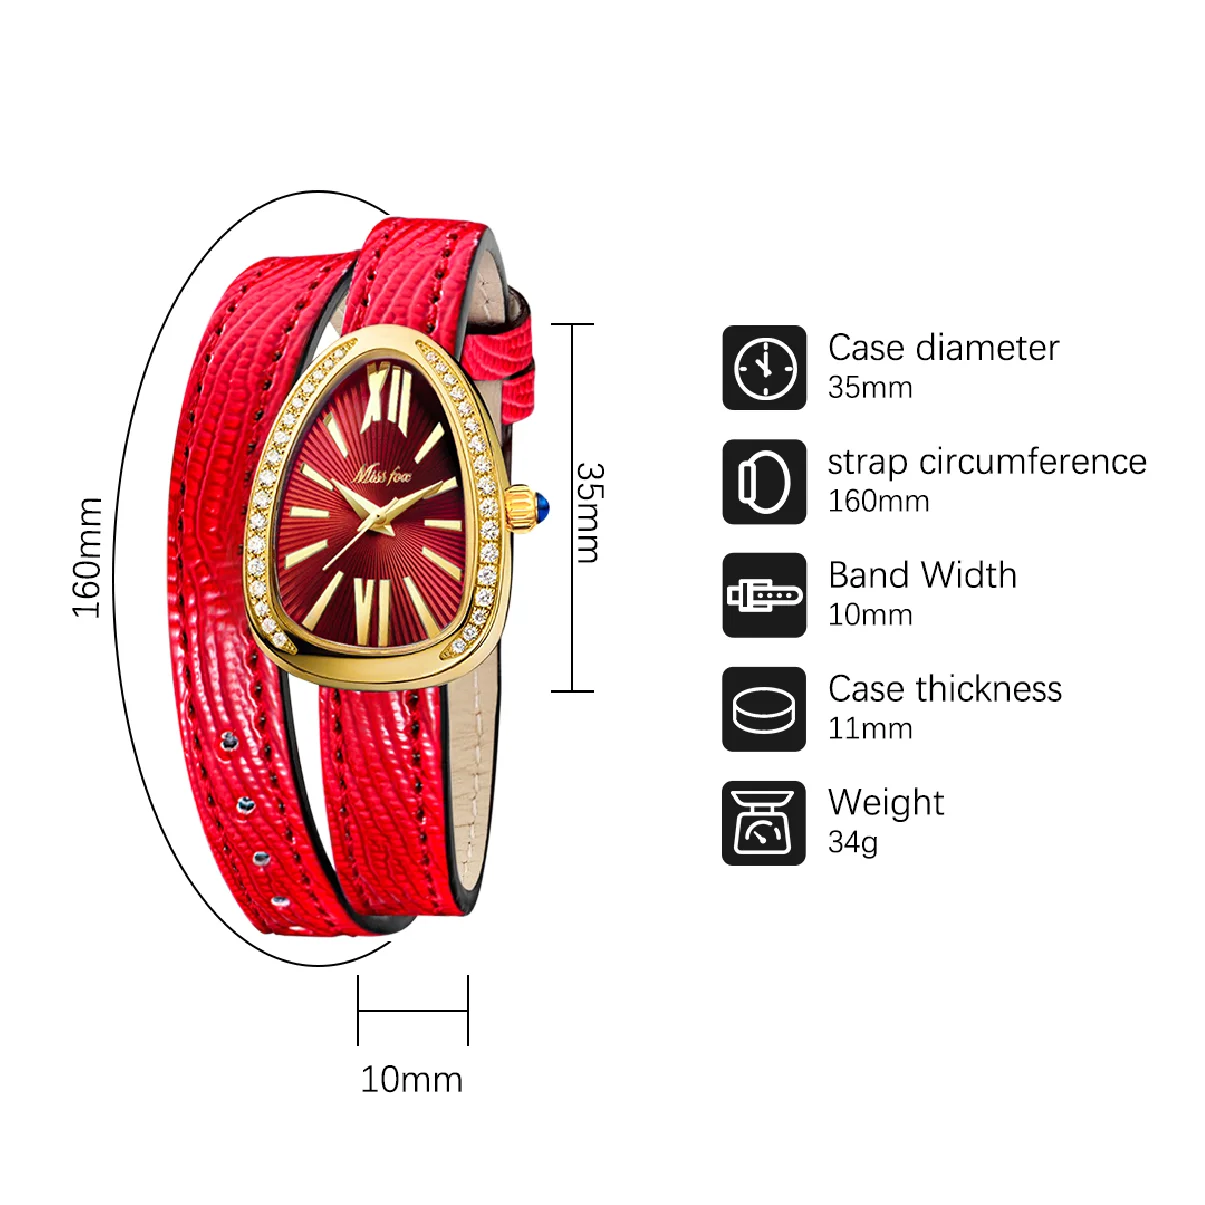 Long Leather Bracelet 18K Gold Plated Snake Bezel Japan Quartz Movement Stainless Steel 30m Waterproof Red Dial Women's Watches enlarge